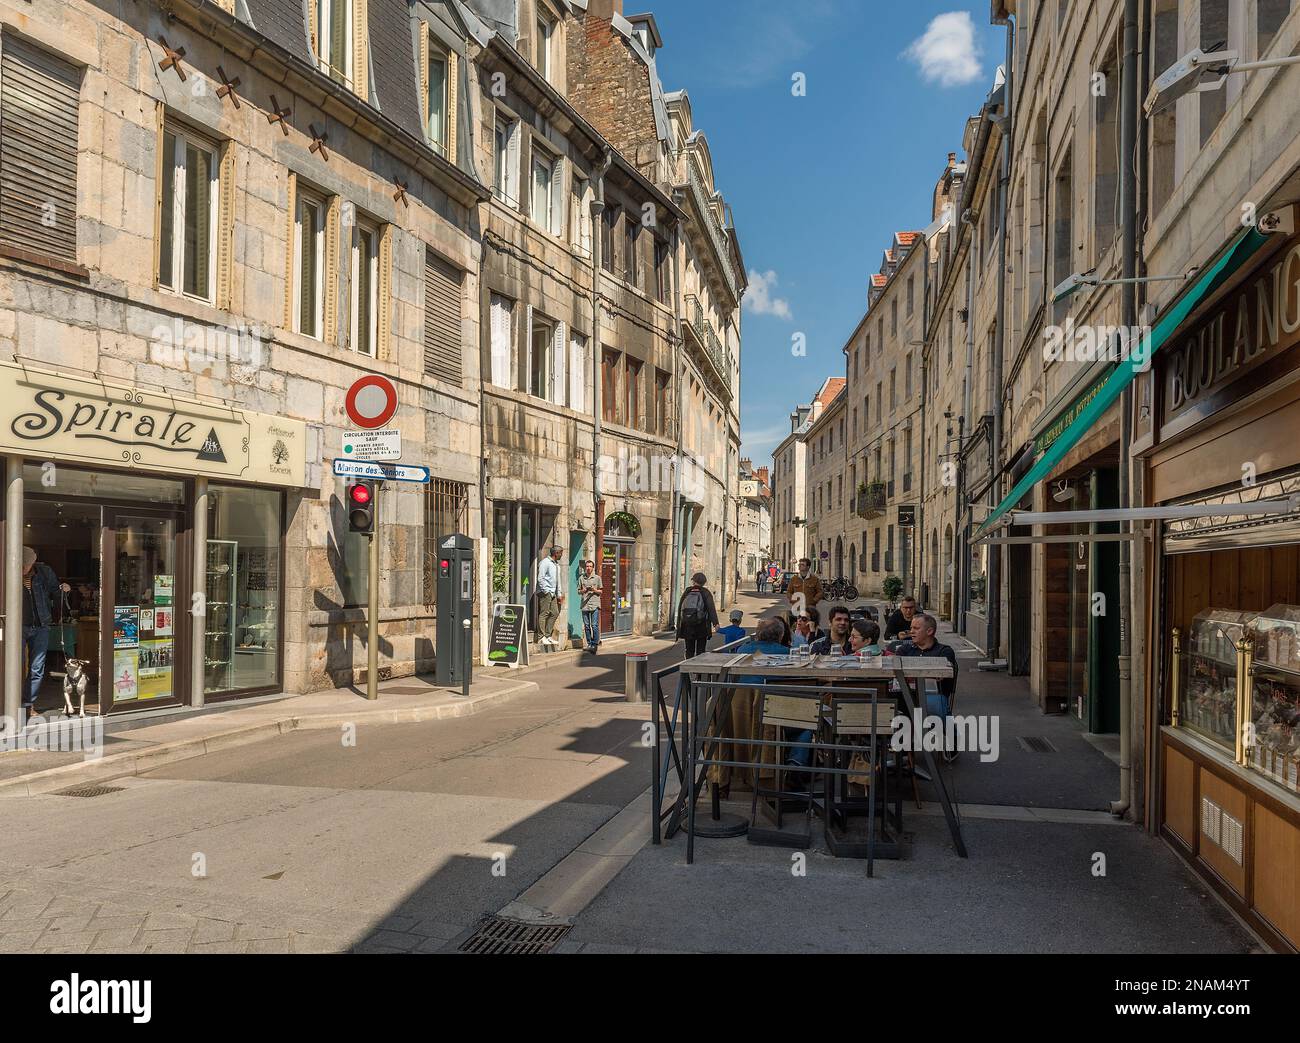 View of unidentified people on a street in Besancon, France Stock Photo